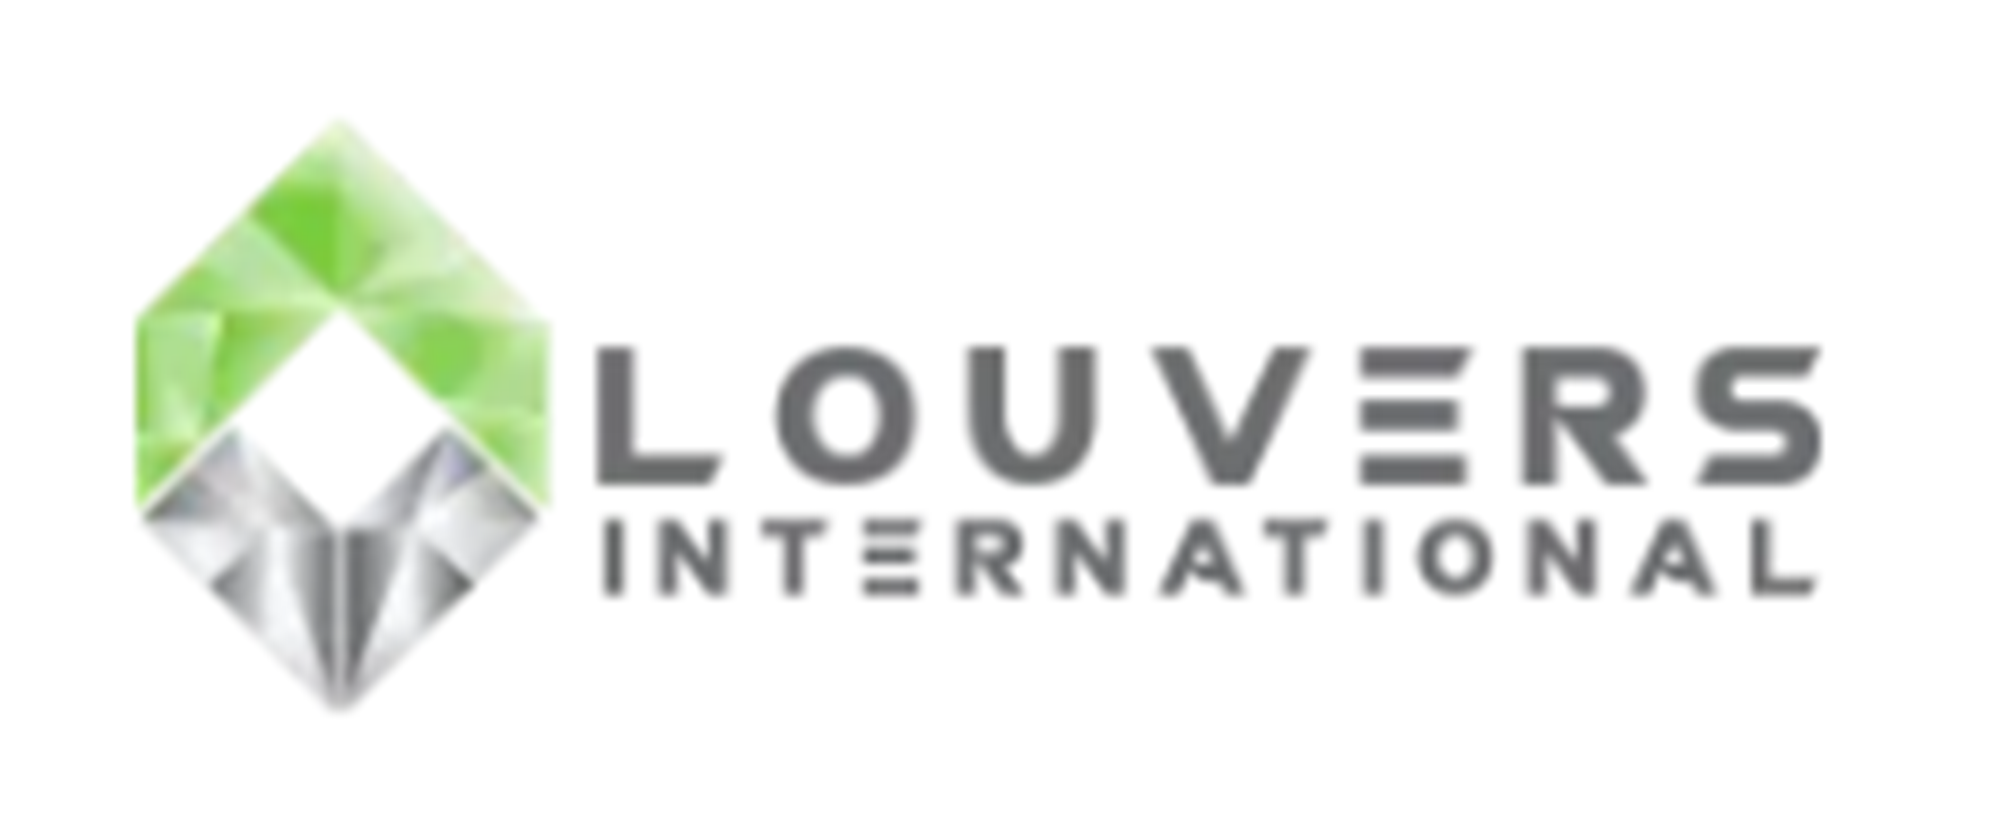 View all of our Louvers International products.